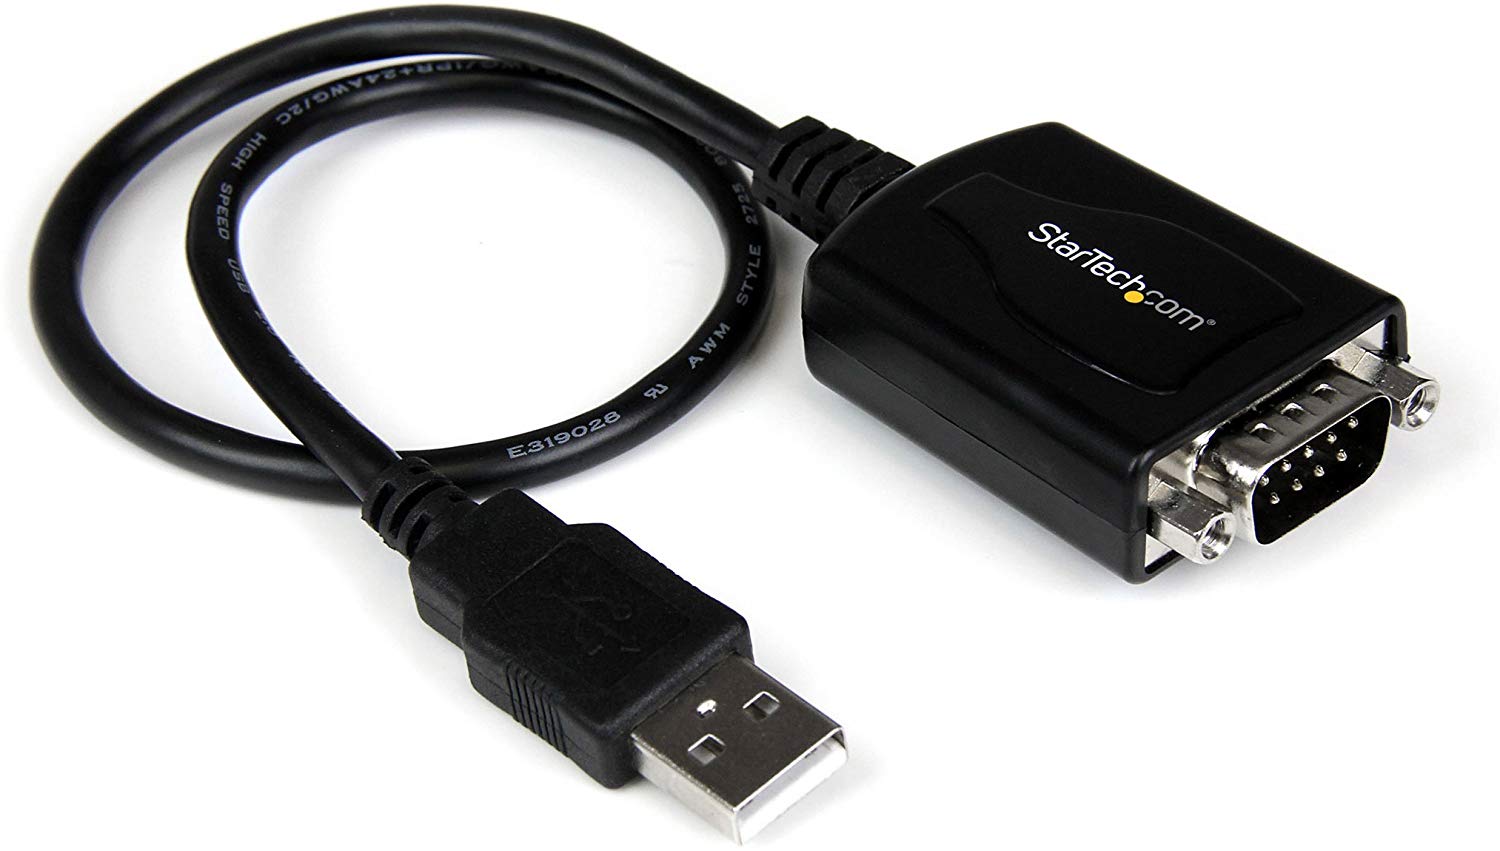 StarTech.comIndustrial USB RS232 Serial Adapter